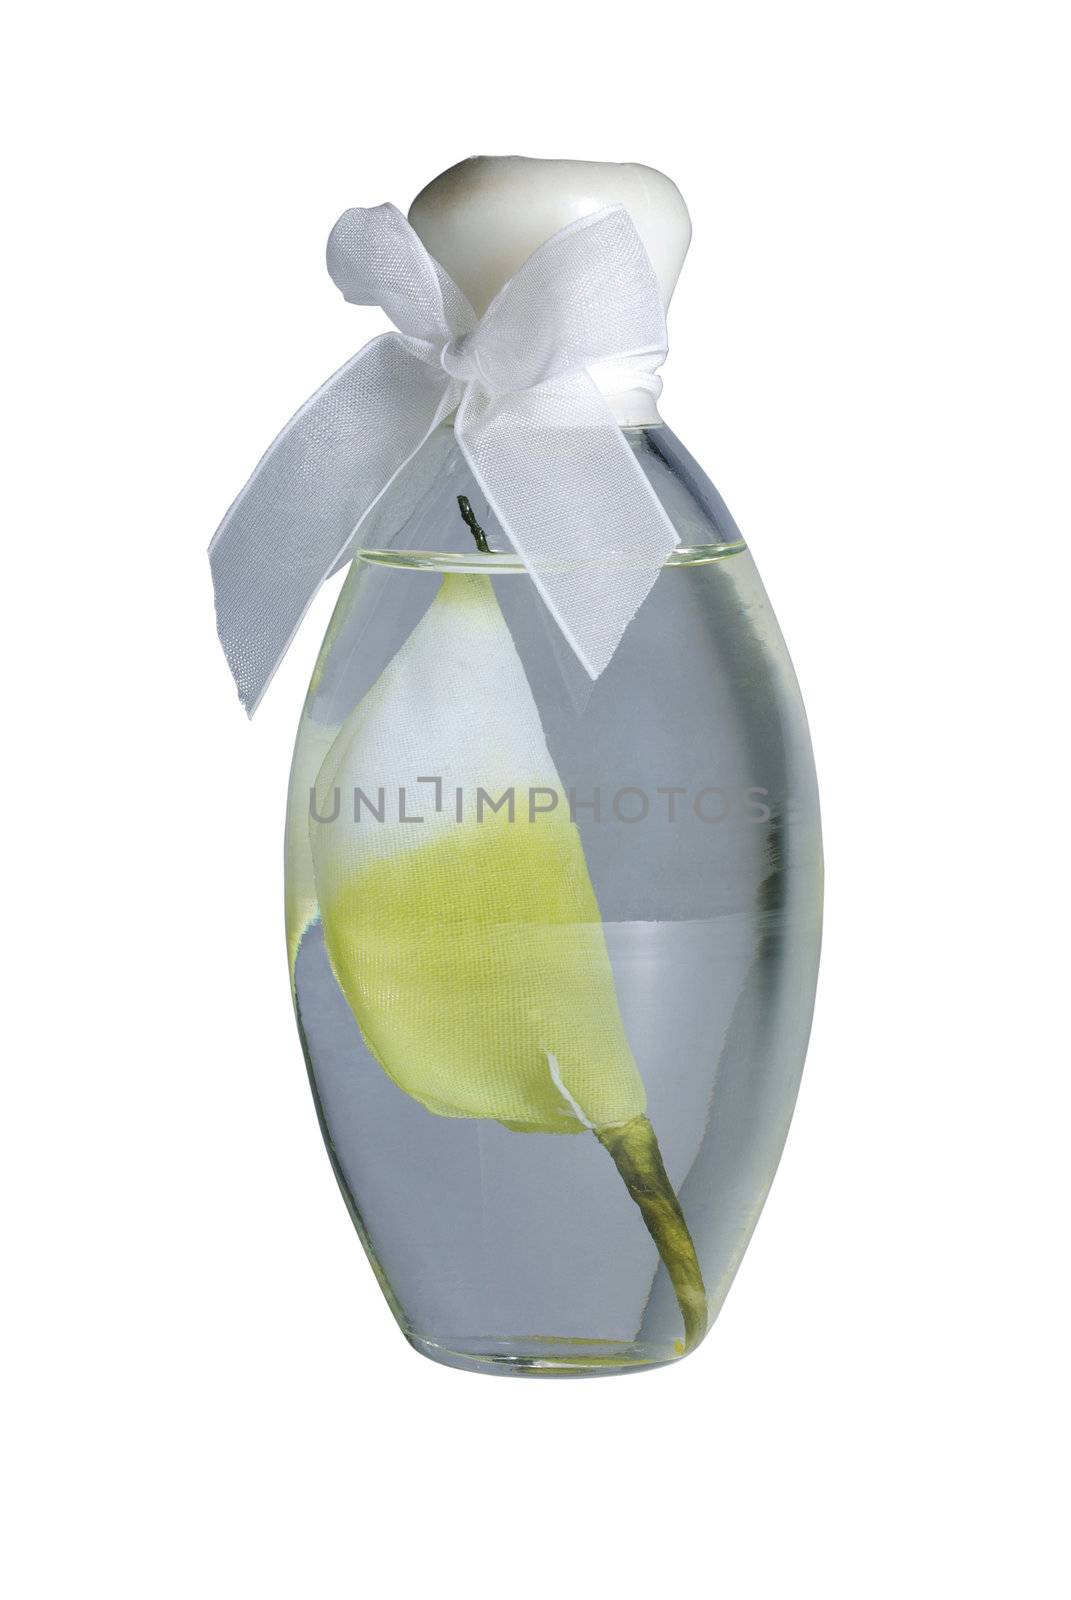 Flask with aroma oil and decoration isolated on white background.